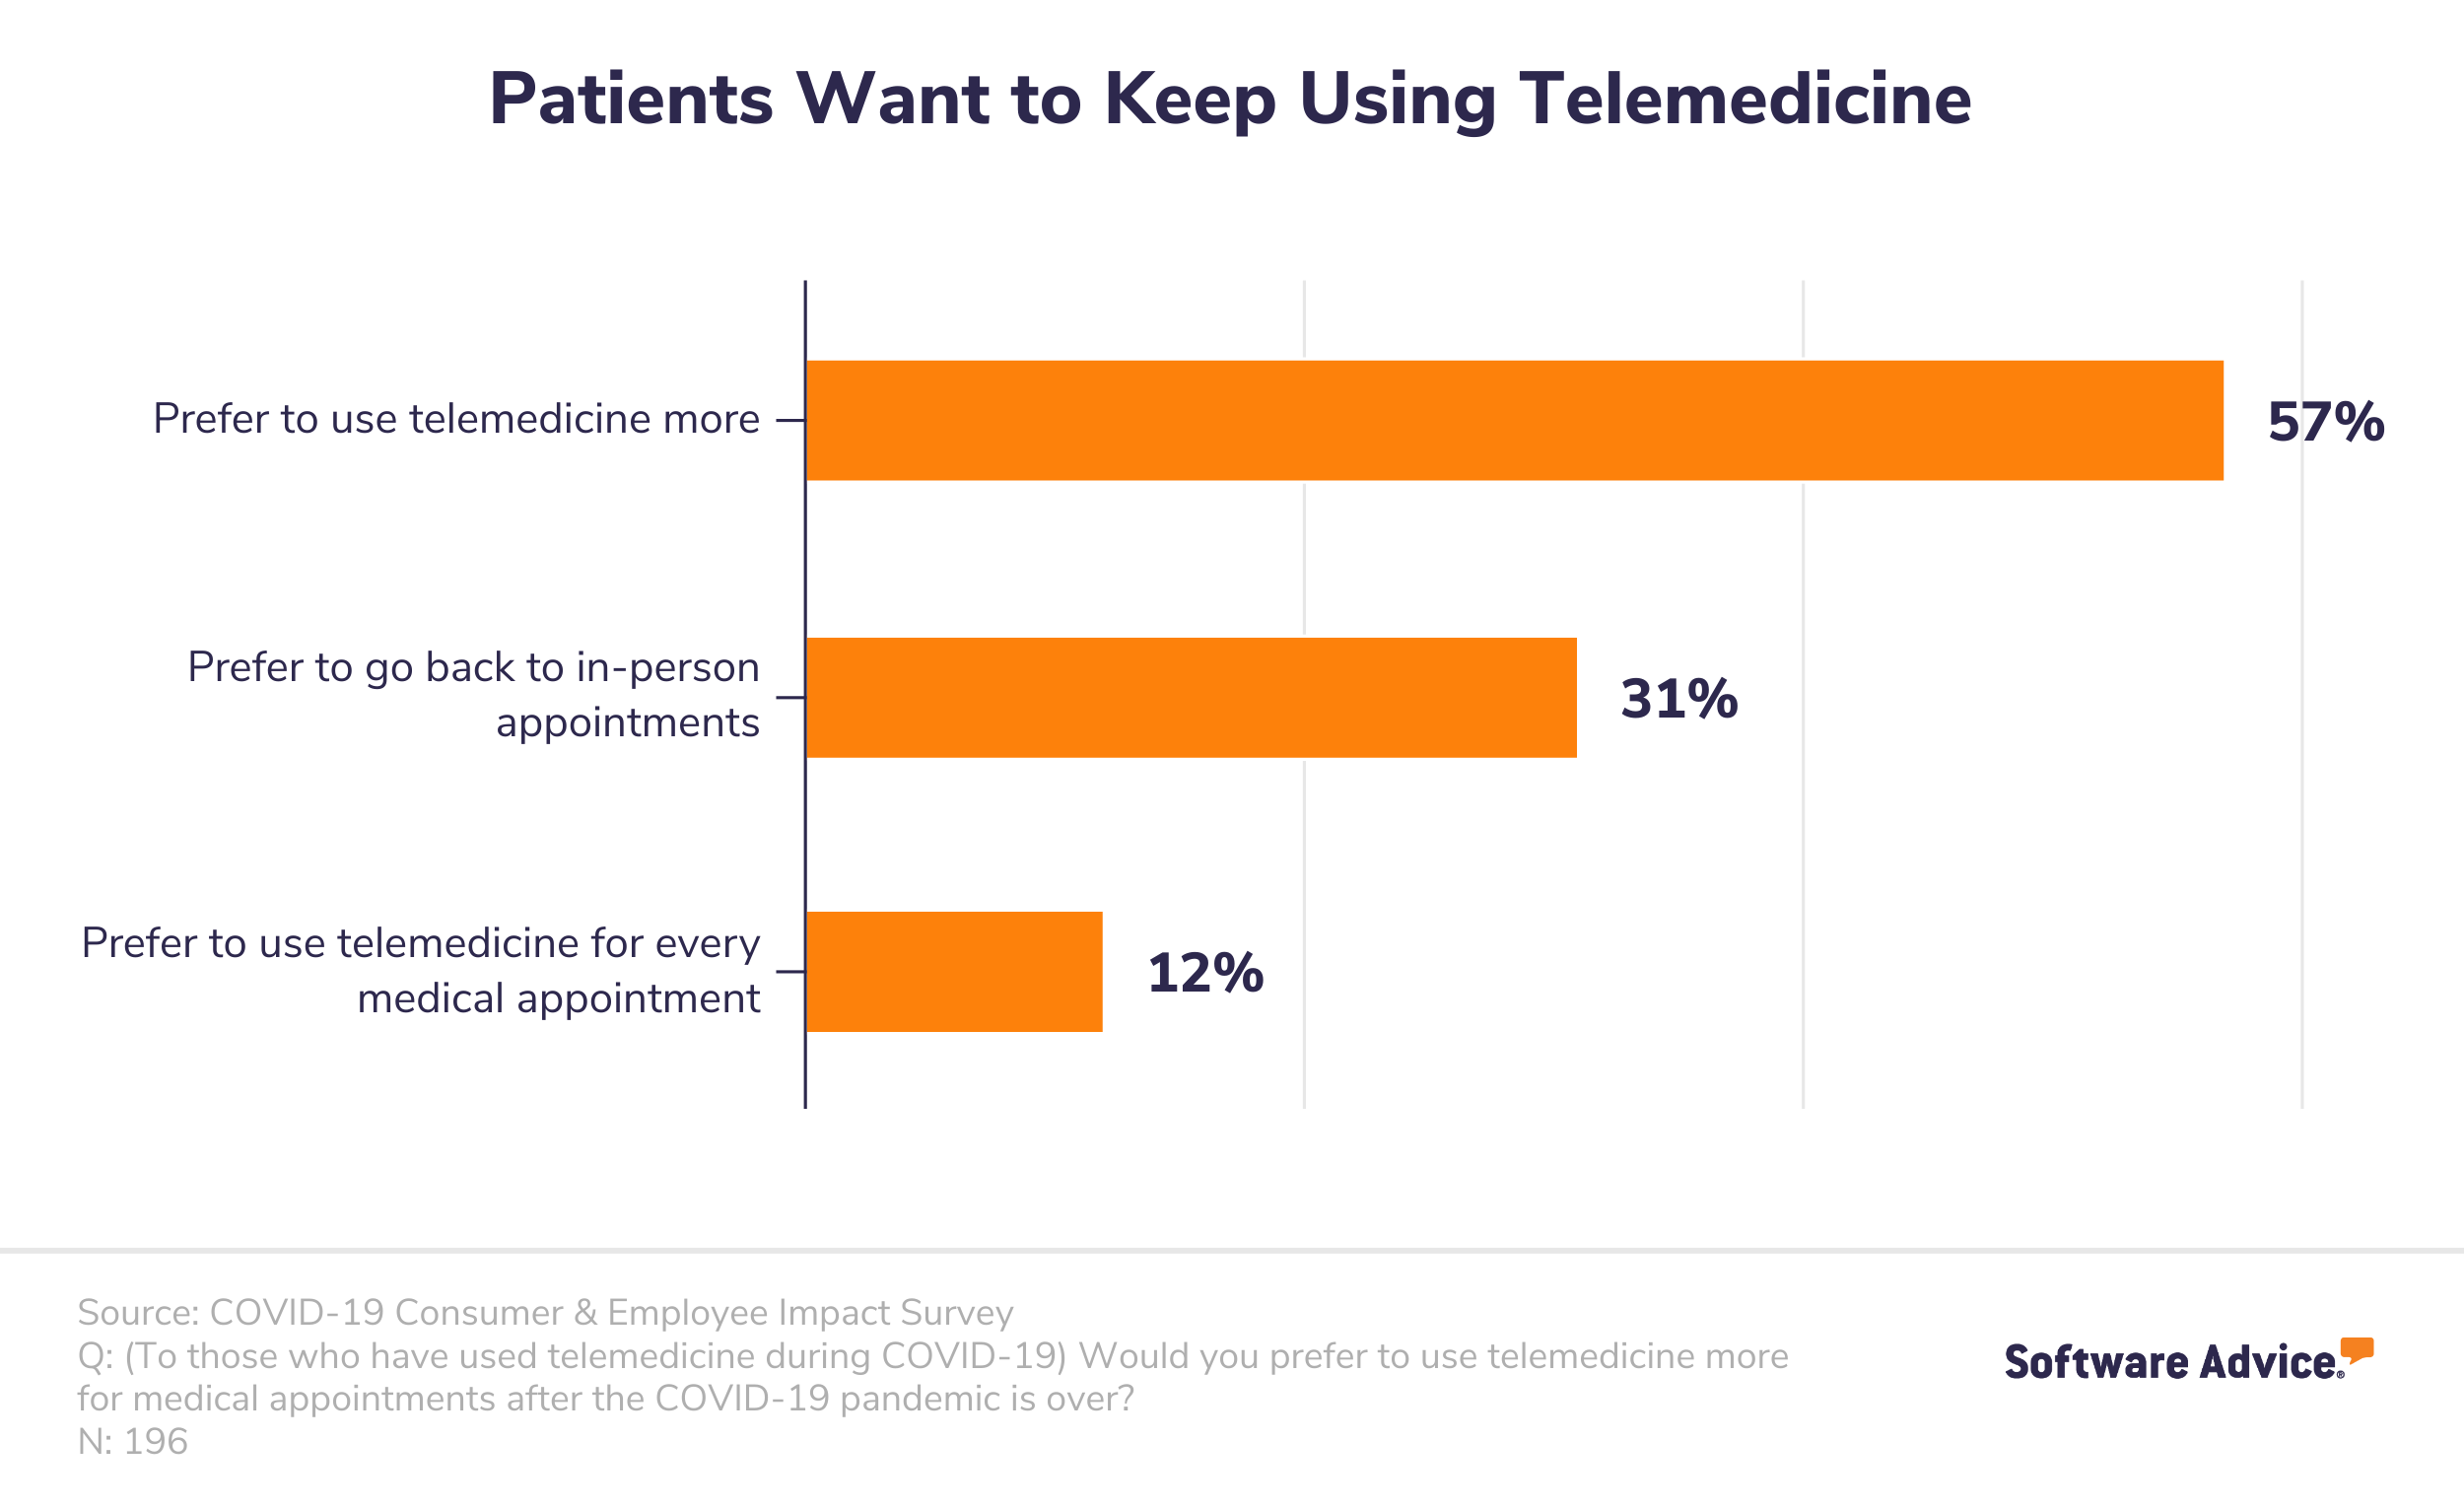 Patients-who-have-used-telemedicine-during-COVID-19-want-to-continue